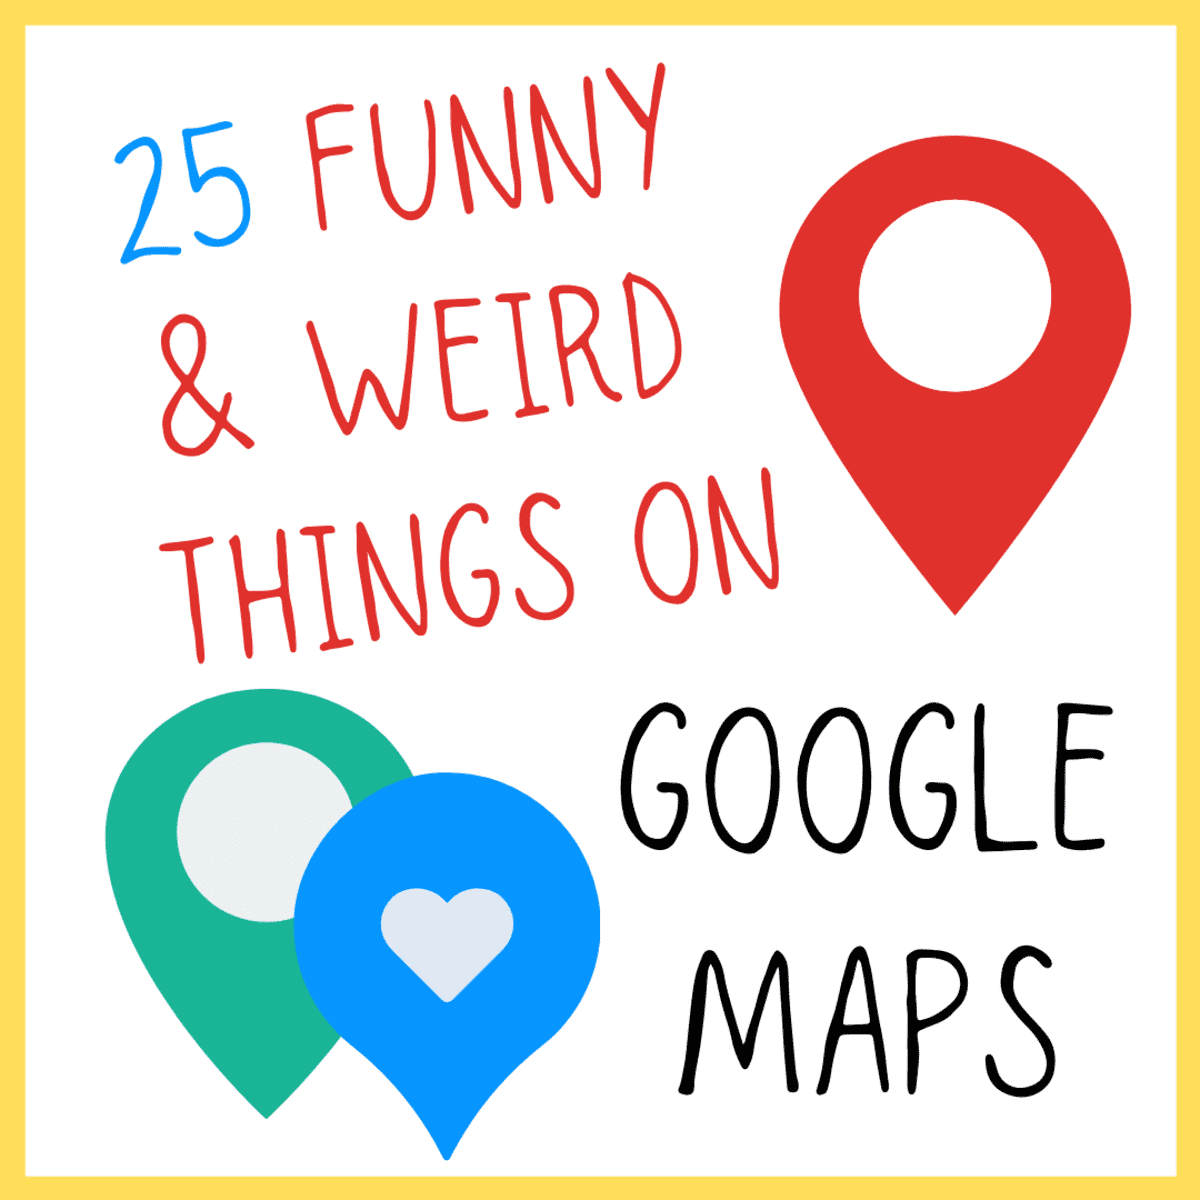 25 Funny Things on Google Maps - TurboFuture